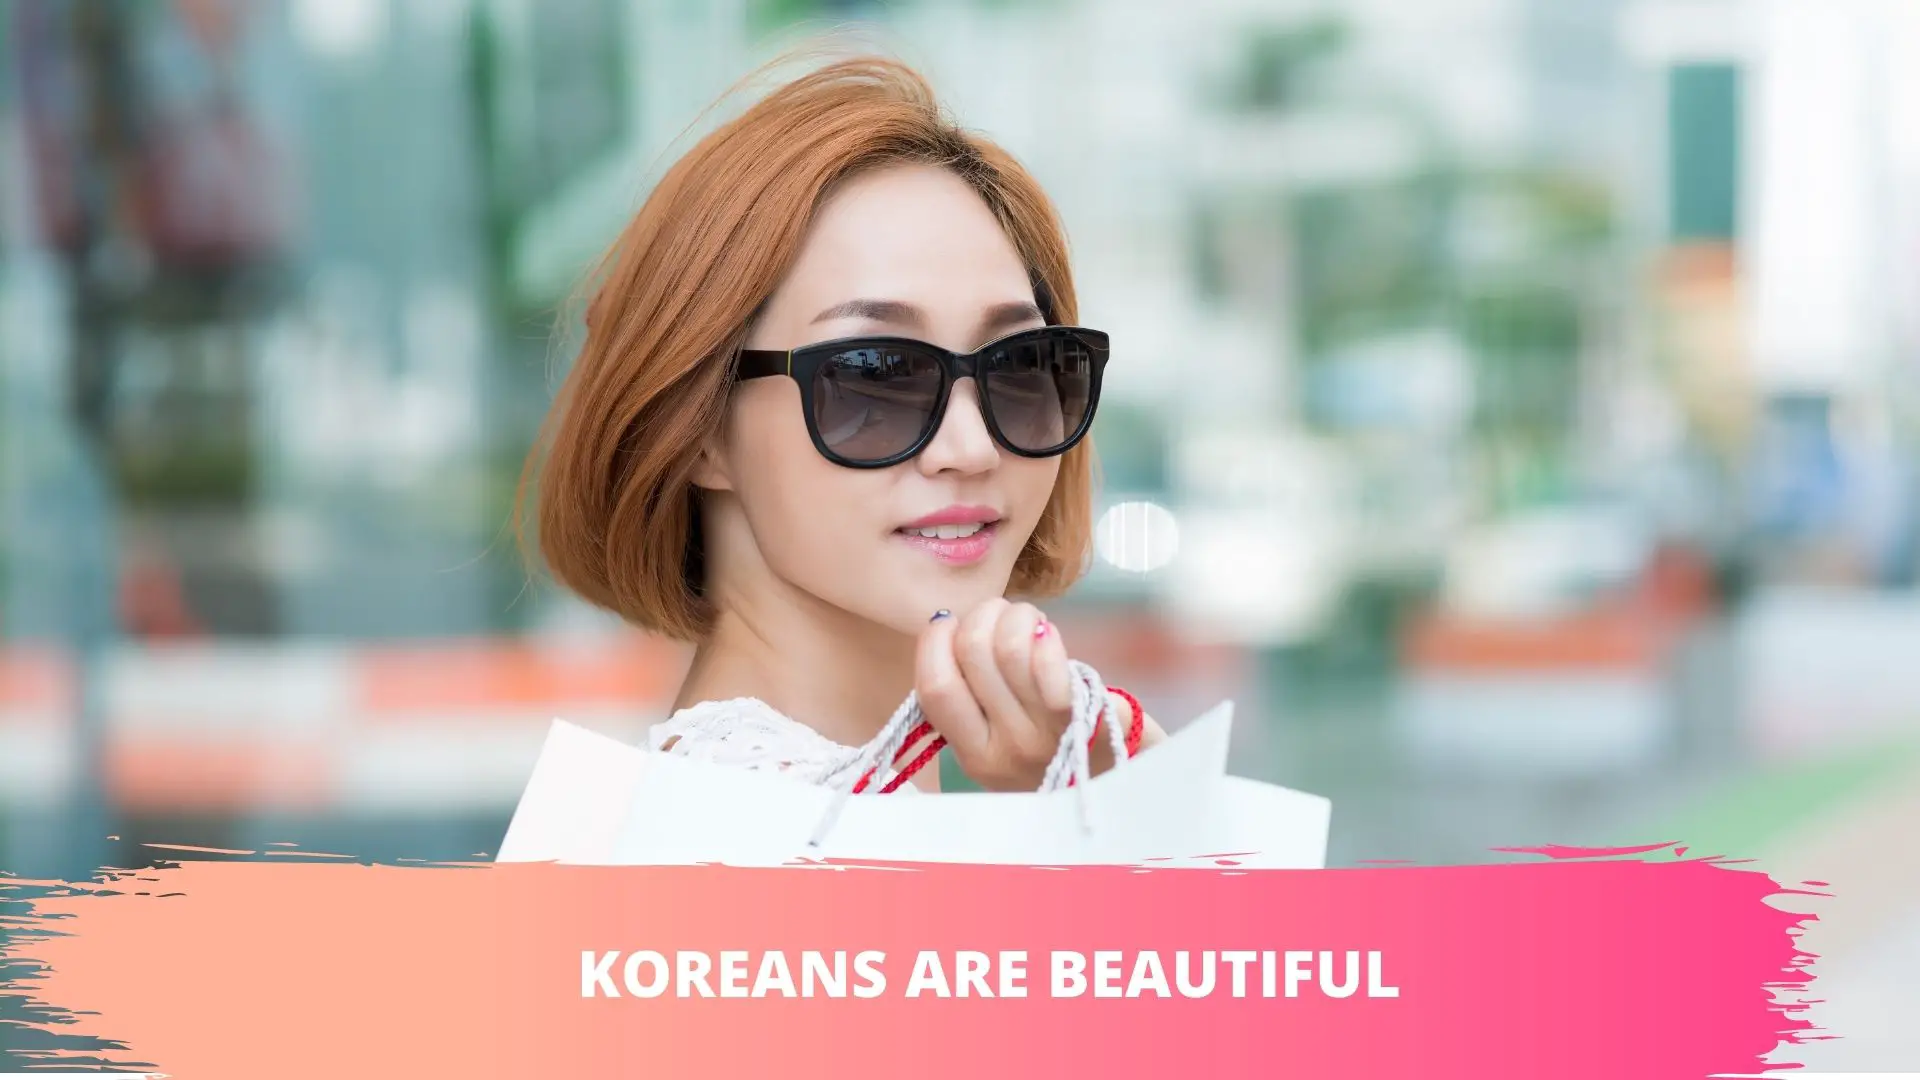 why are koreans beautiful